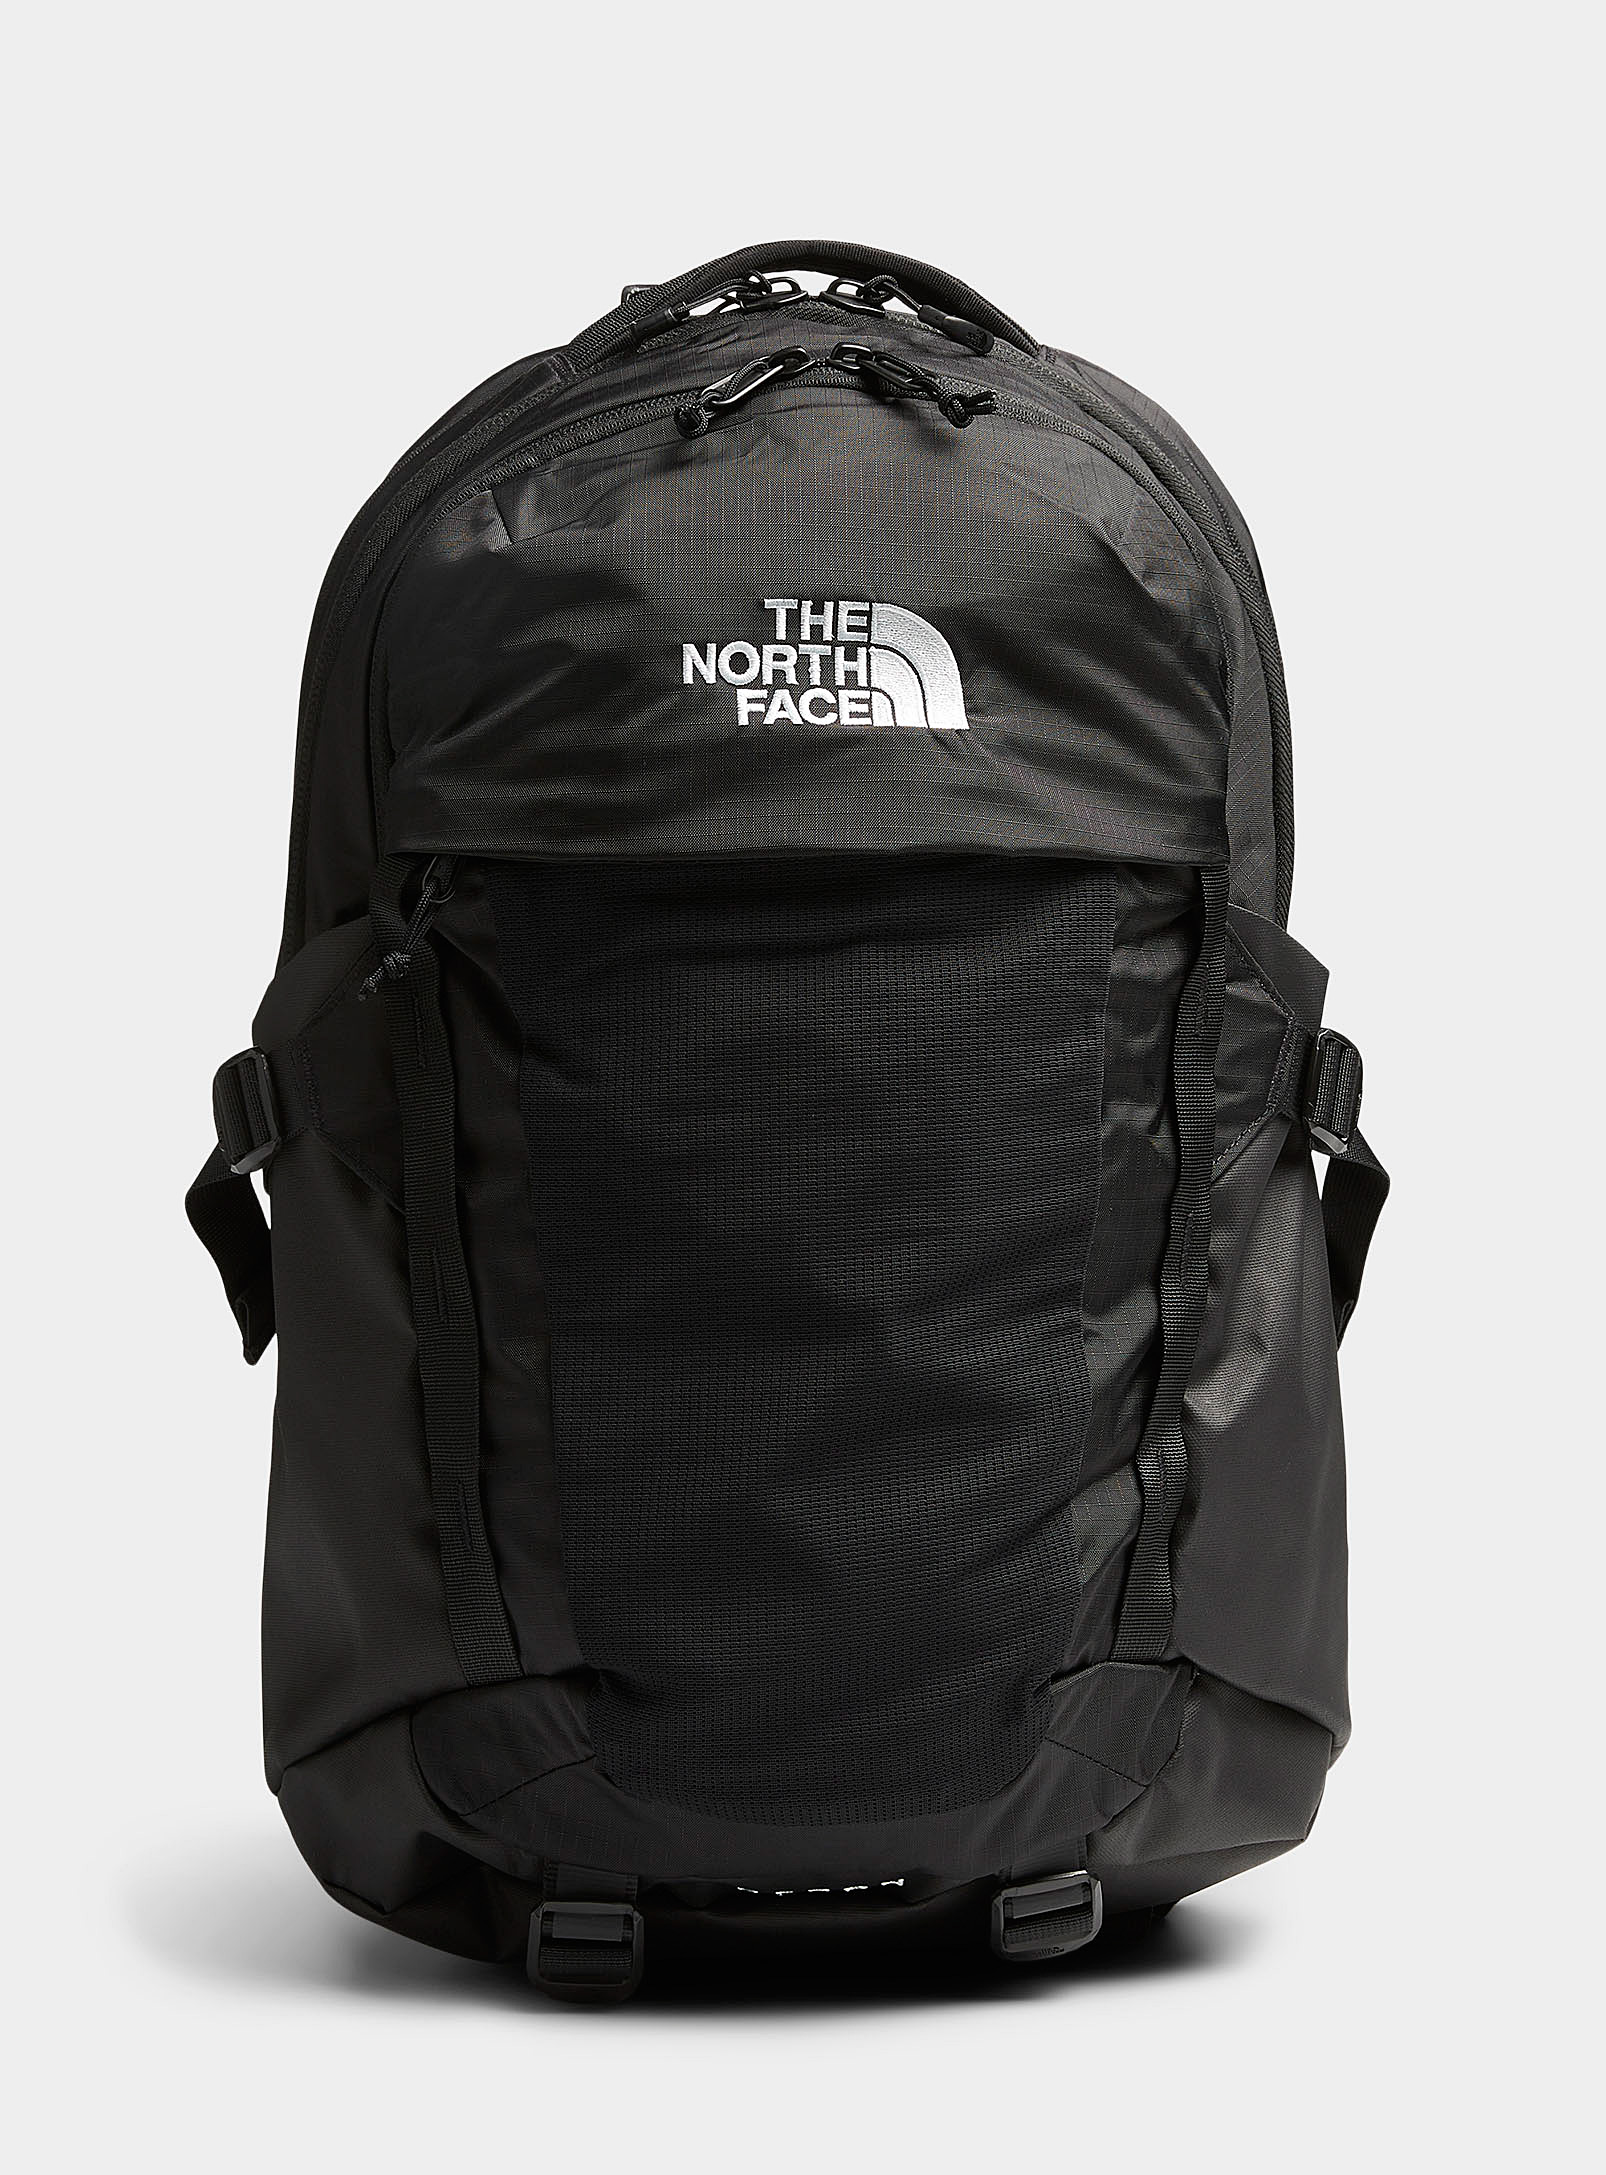 The North Face Recon Backpack In Black